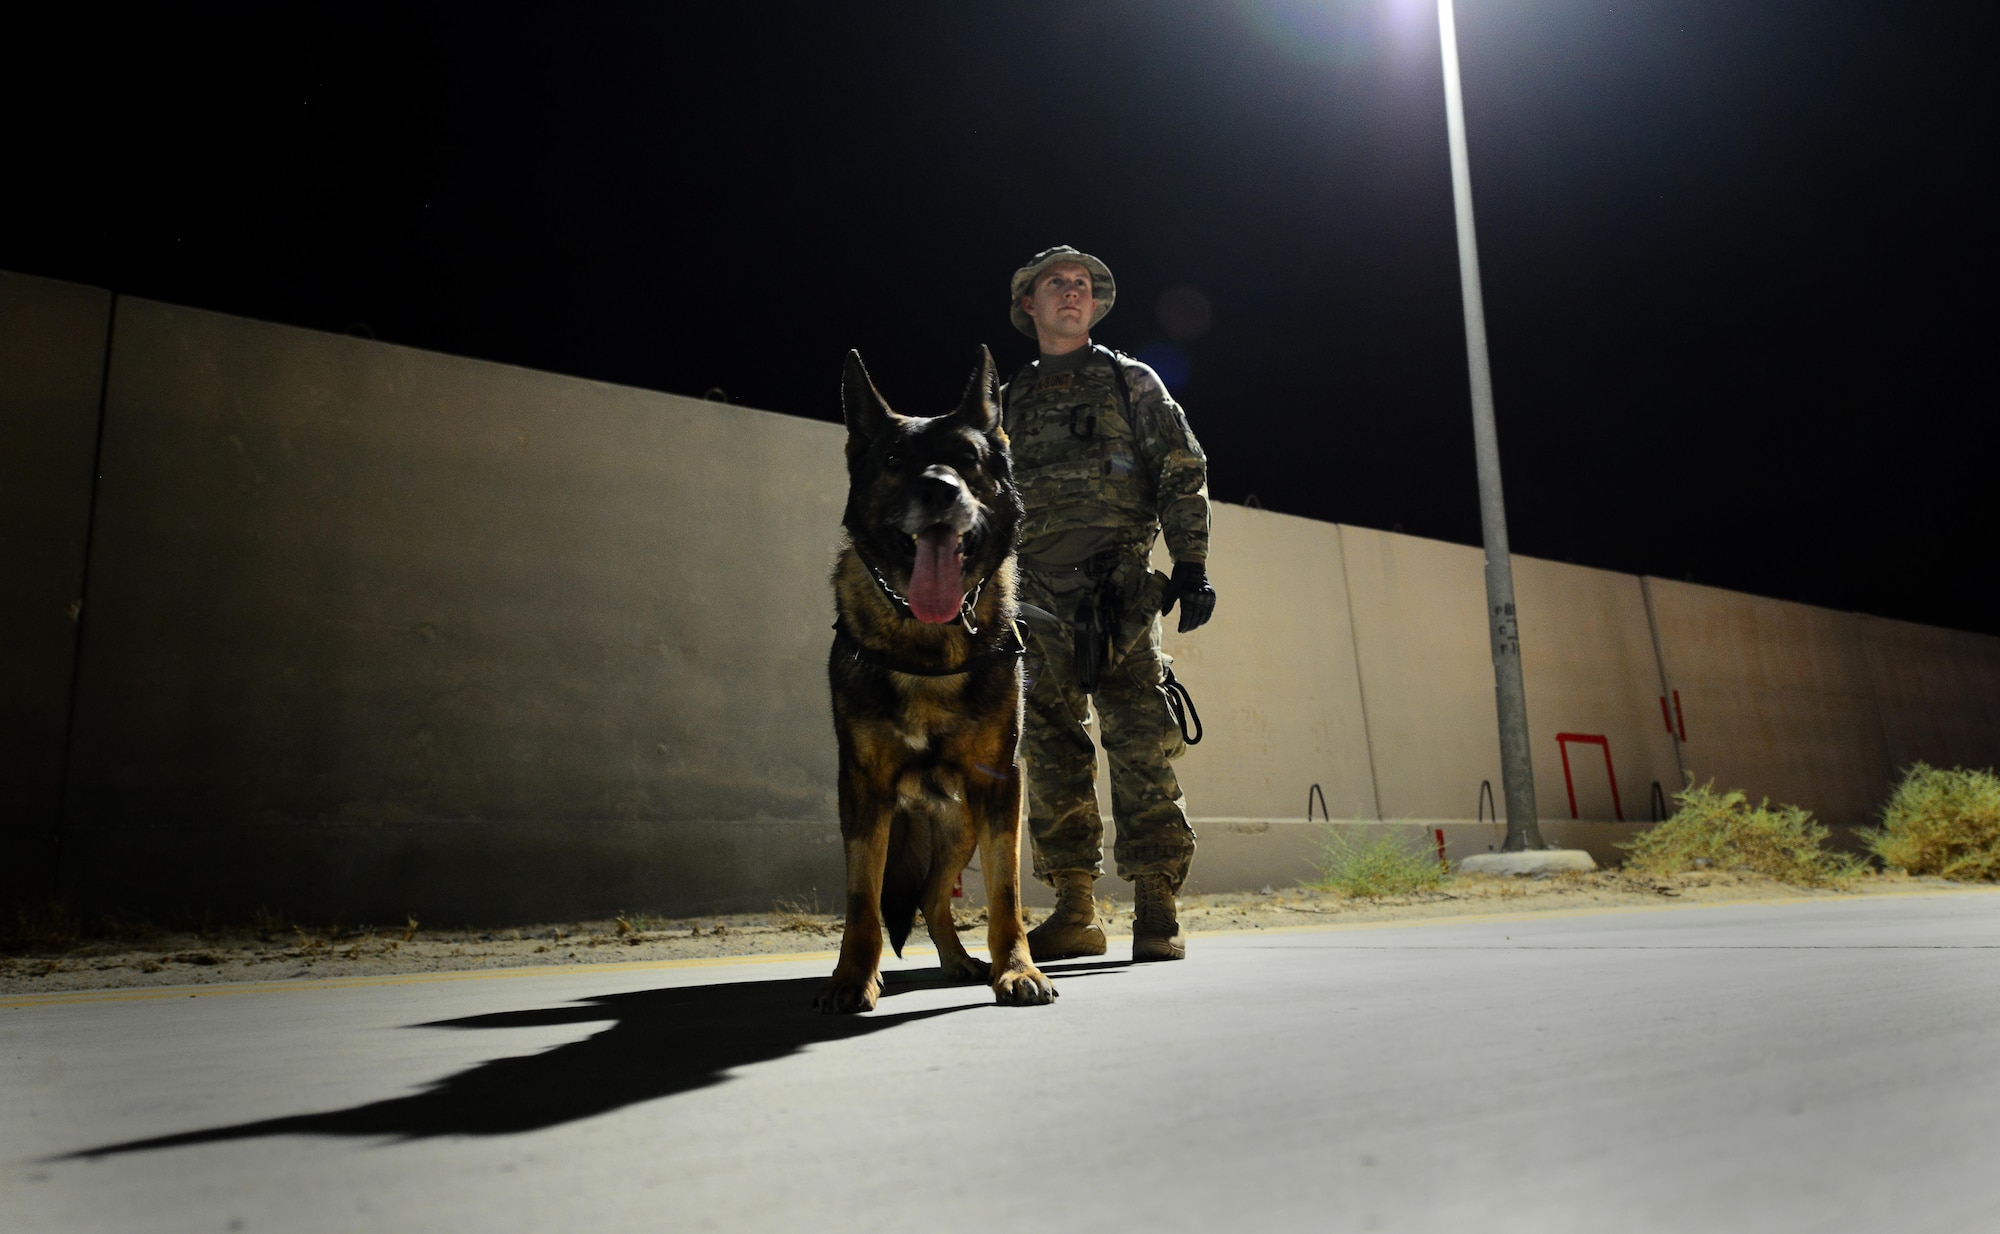 U.S. Air Force Senior Airman Carlton Isaacson, a military working dog handler assigned to the 407th Expeditionary Security Forces Squadron and his partner Egon, patrol the flightline in Southwest Asia on May 23, 2017. Isaacson and Egon have been partners for two years now and are deployed in support of Operation Inherent Resolve. Military working dogs are the first line of defense when it comes to explosive detection and provide security sweeps throughout the installation. (U.S. Air Force photo by Tech Sgt. Andy M. Kin)